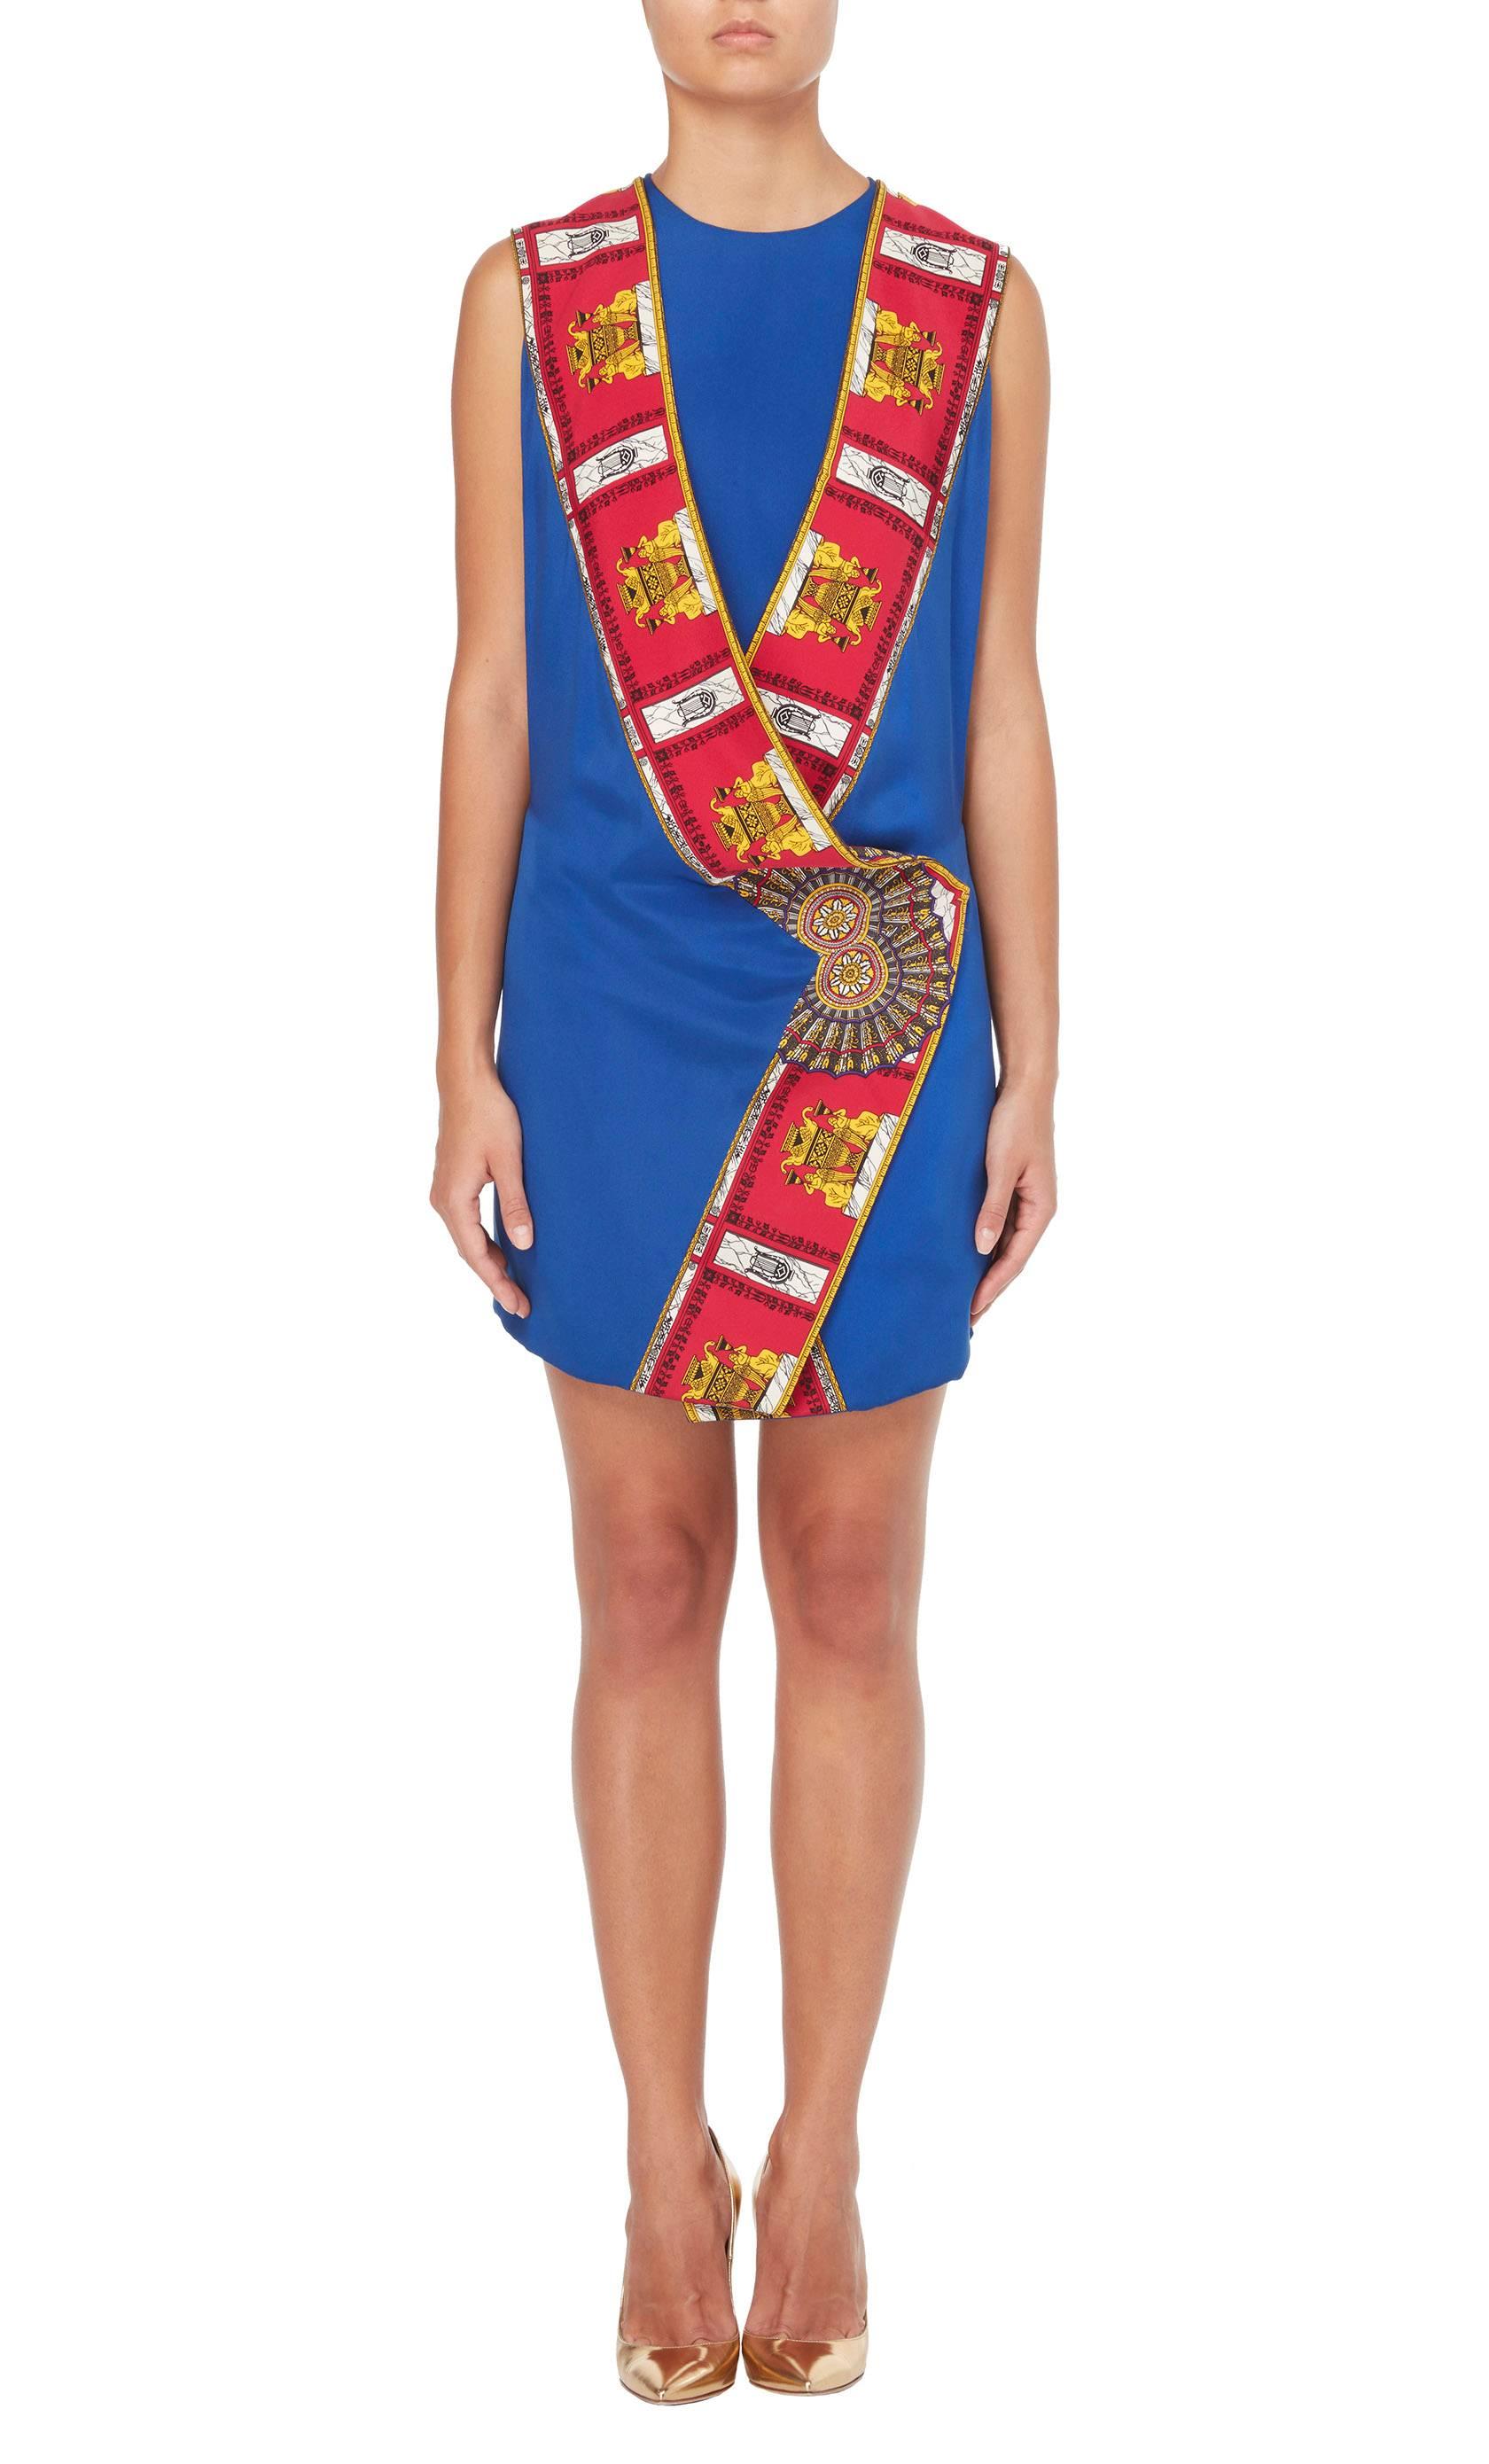 As seen on the Spring/Summer 1991 runway, a variant of this haute couture dress by Gianni Versace was modelled by Naomi Campbell. The dress comprises of a sleeveless blue silk mini dress, with a matching tunic worn over the top. Featuring a wrap